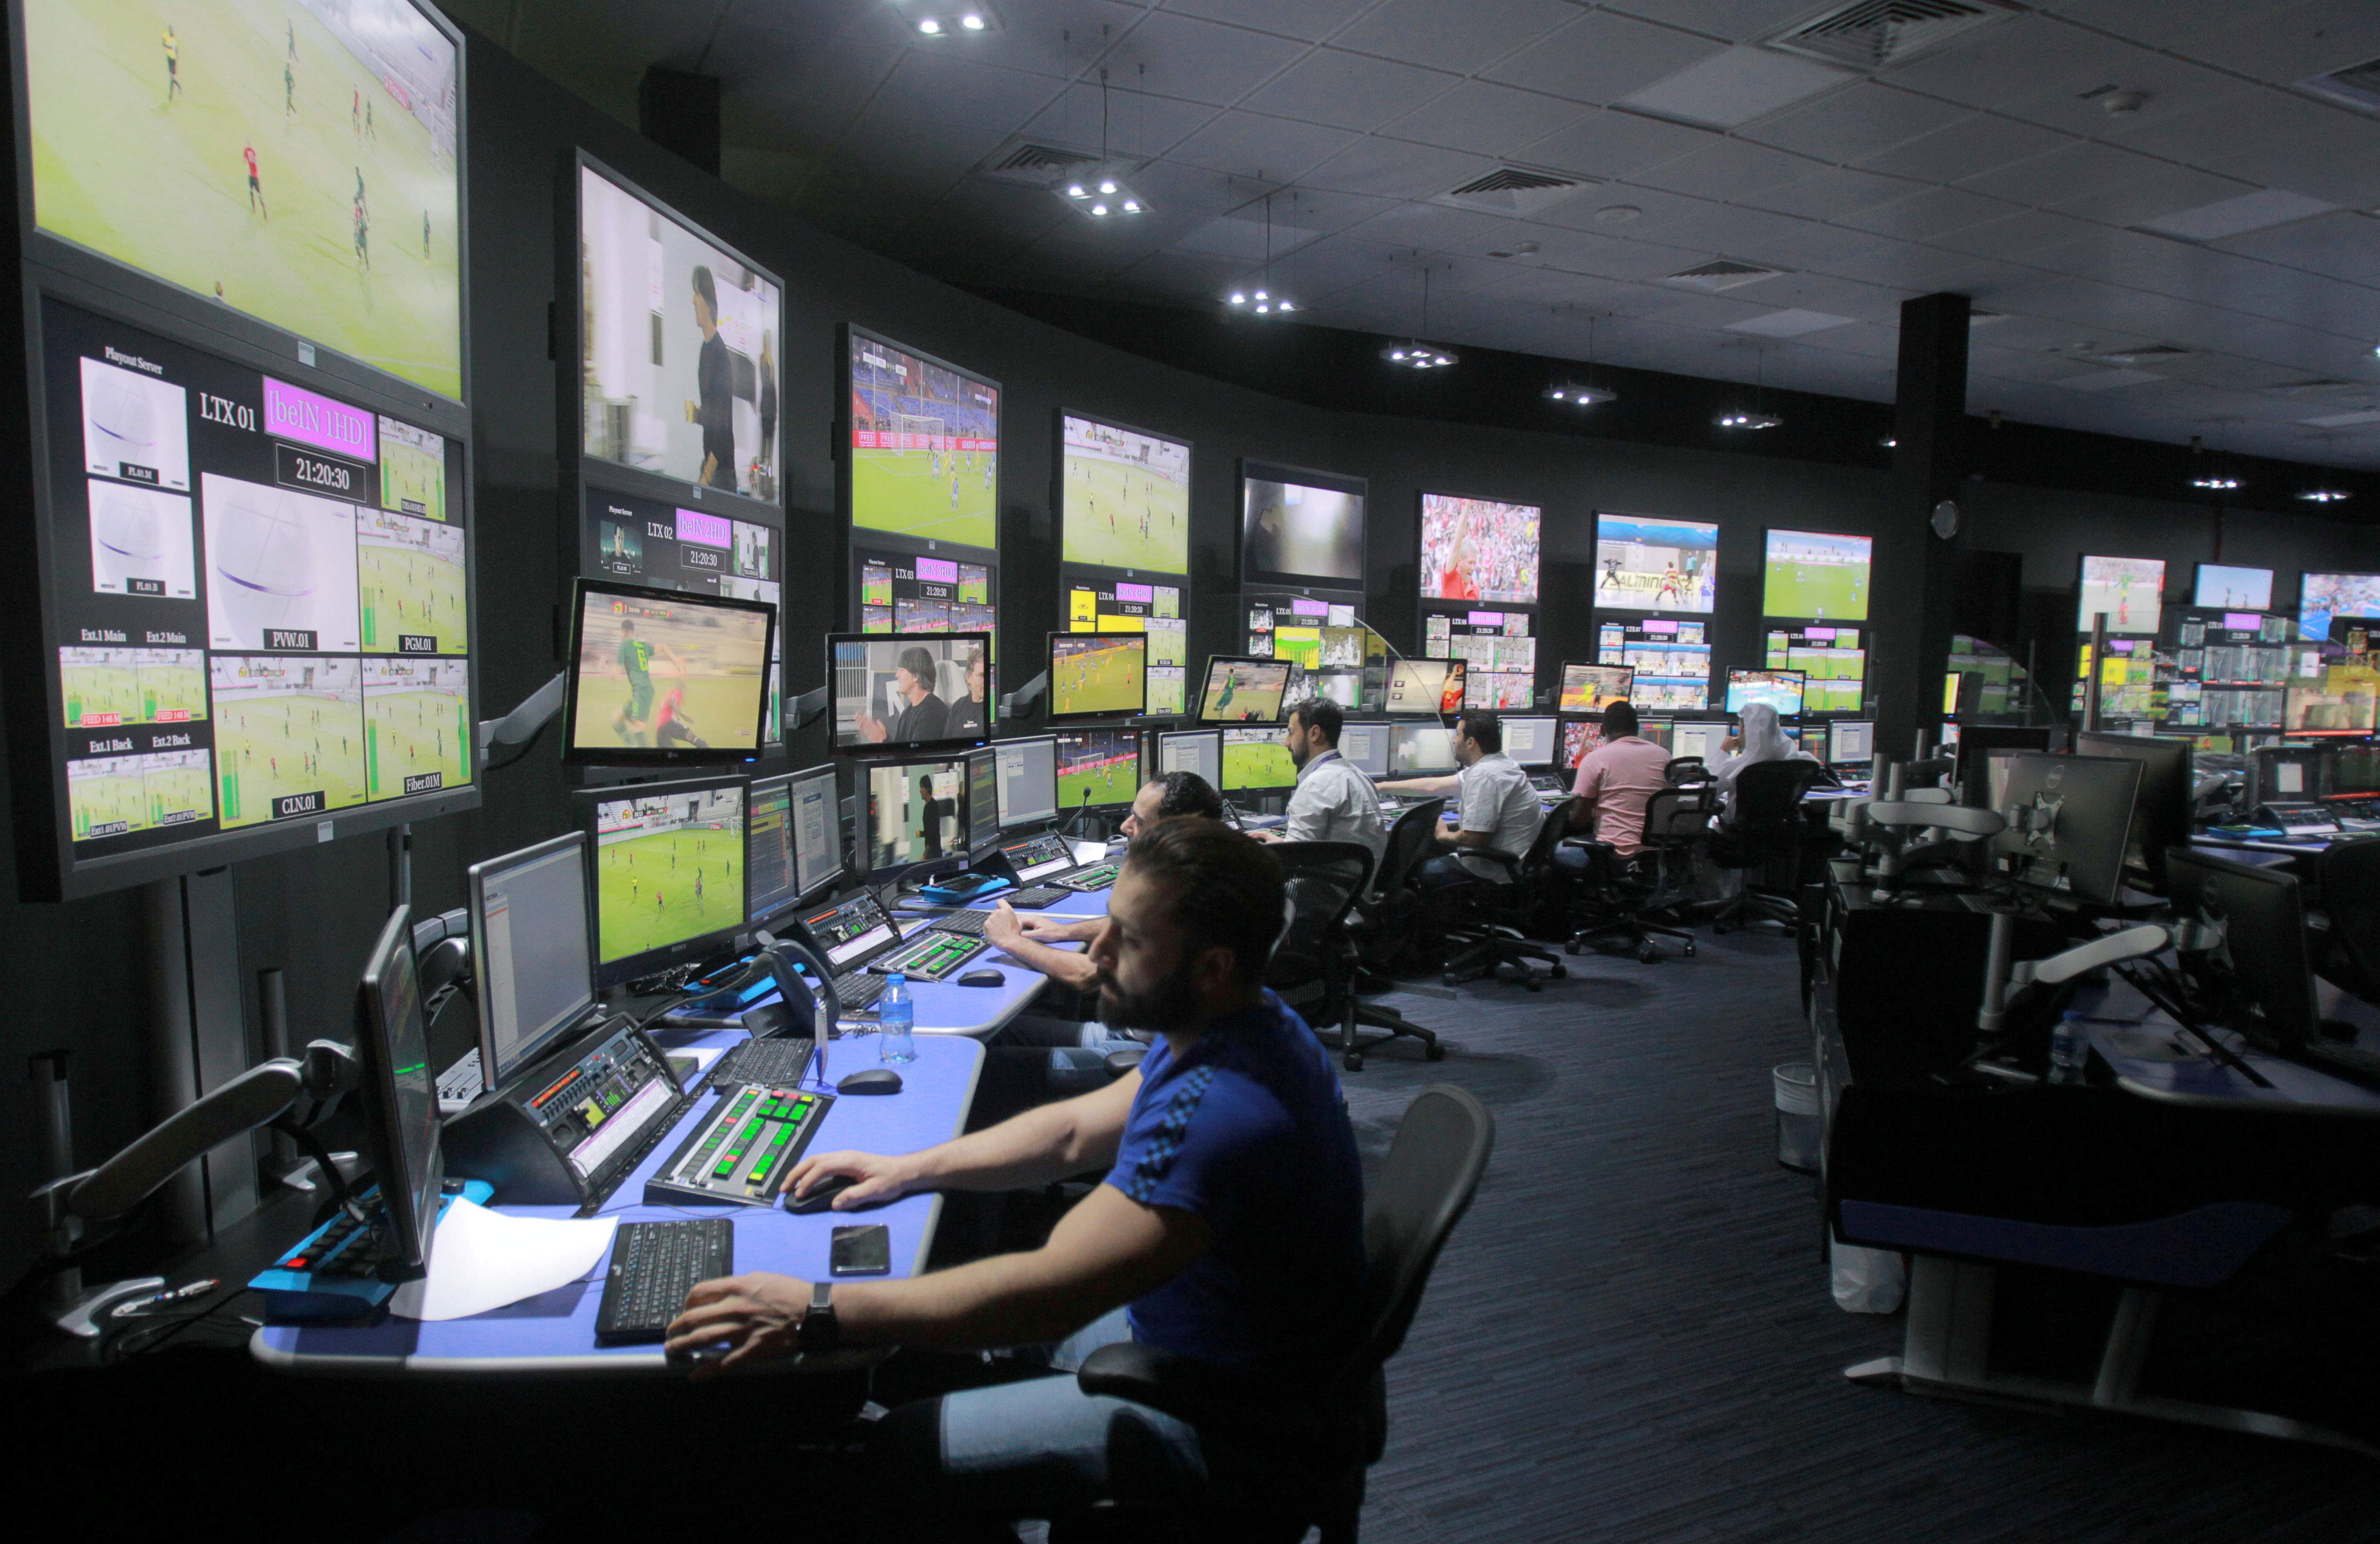 BeIn Sports Saudi Arabia close to lifting ban, says broadcaster Middle East Eye